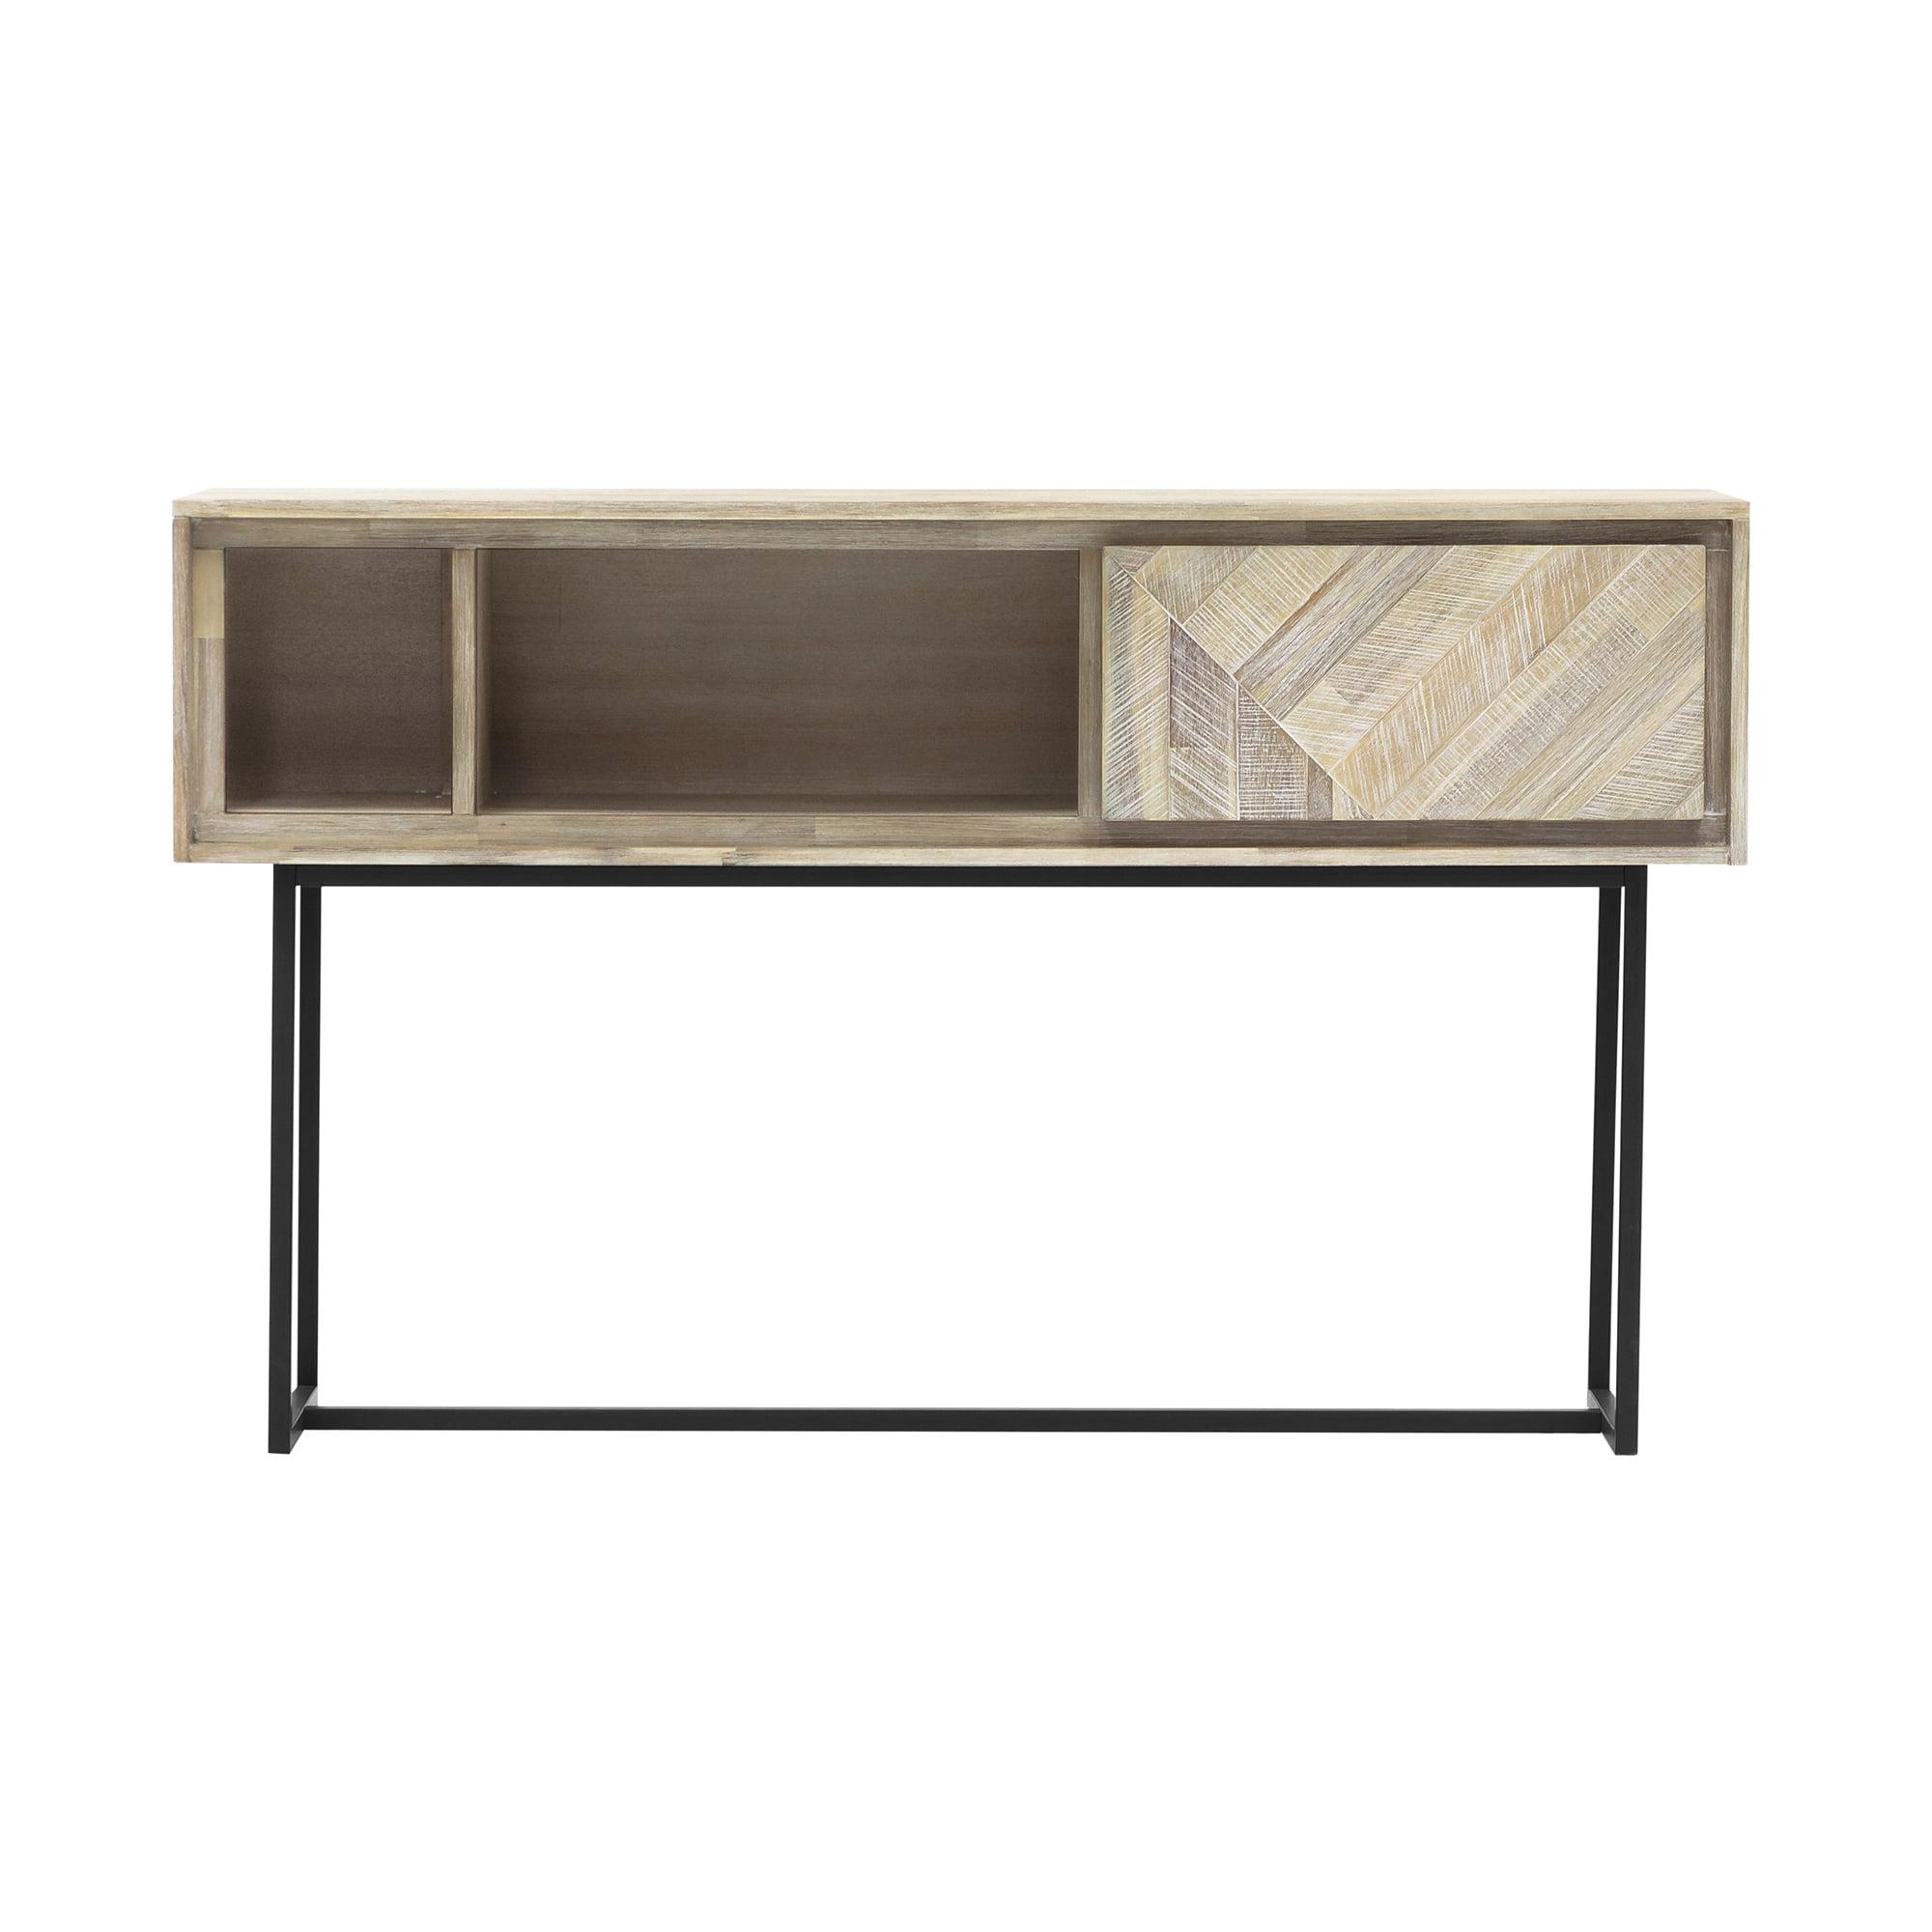 Transitional Beige Acacia Wood Console Table with Storage